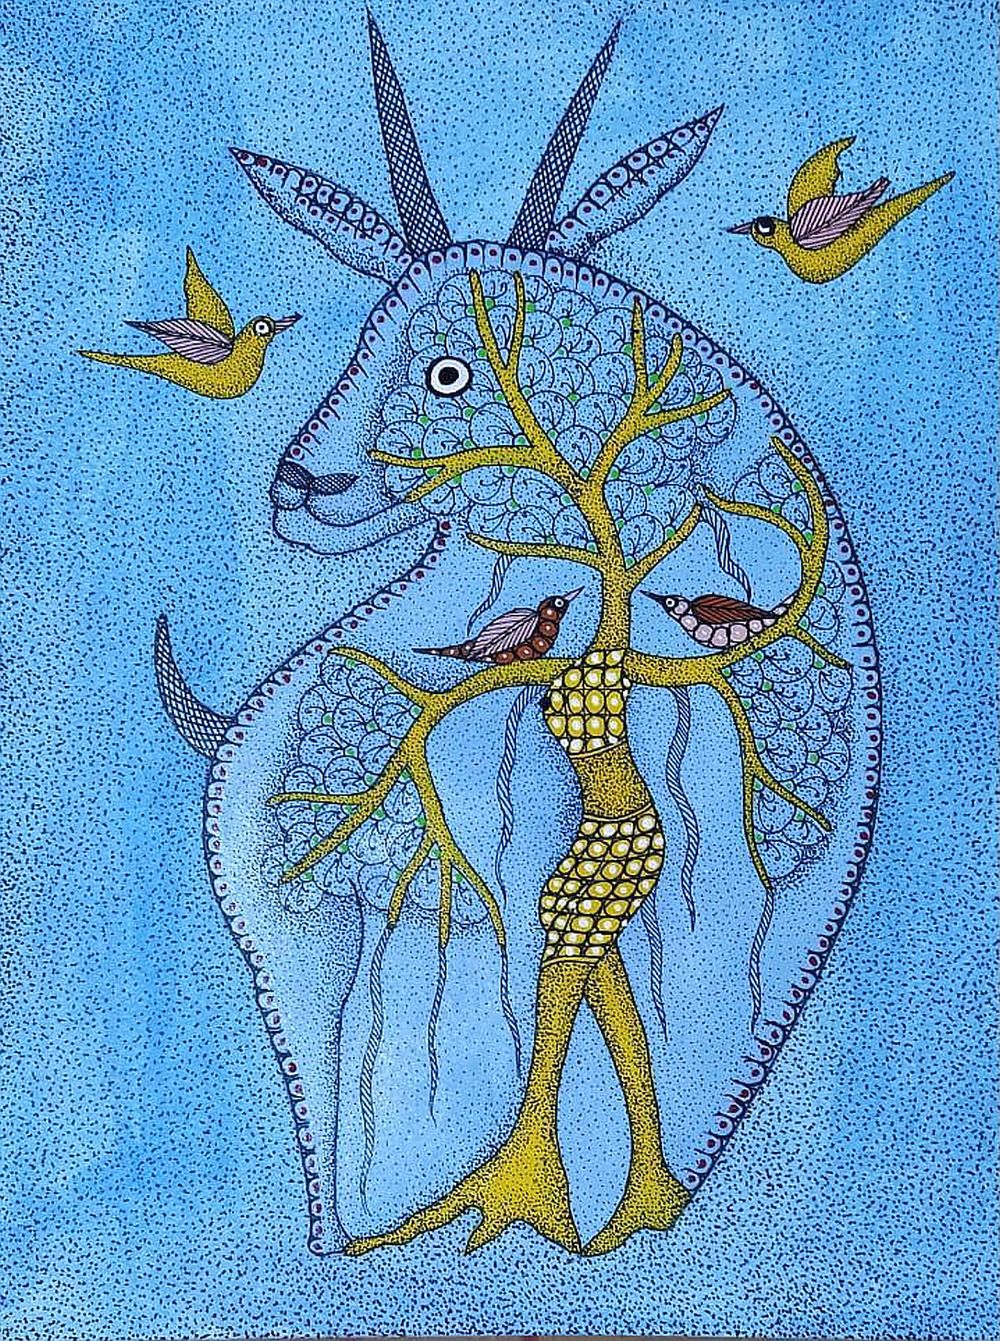 Cycle of Life : Gond painting by OmPrakash Dhurwey